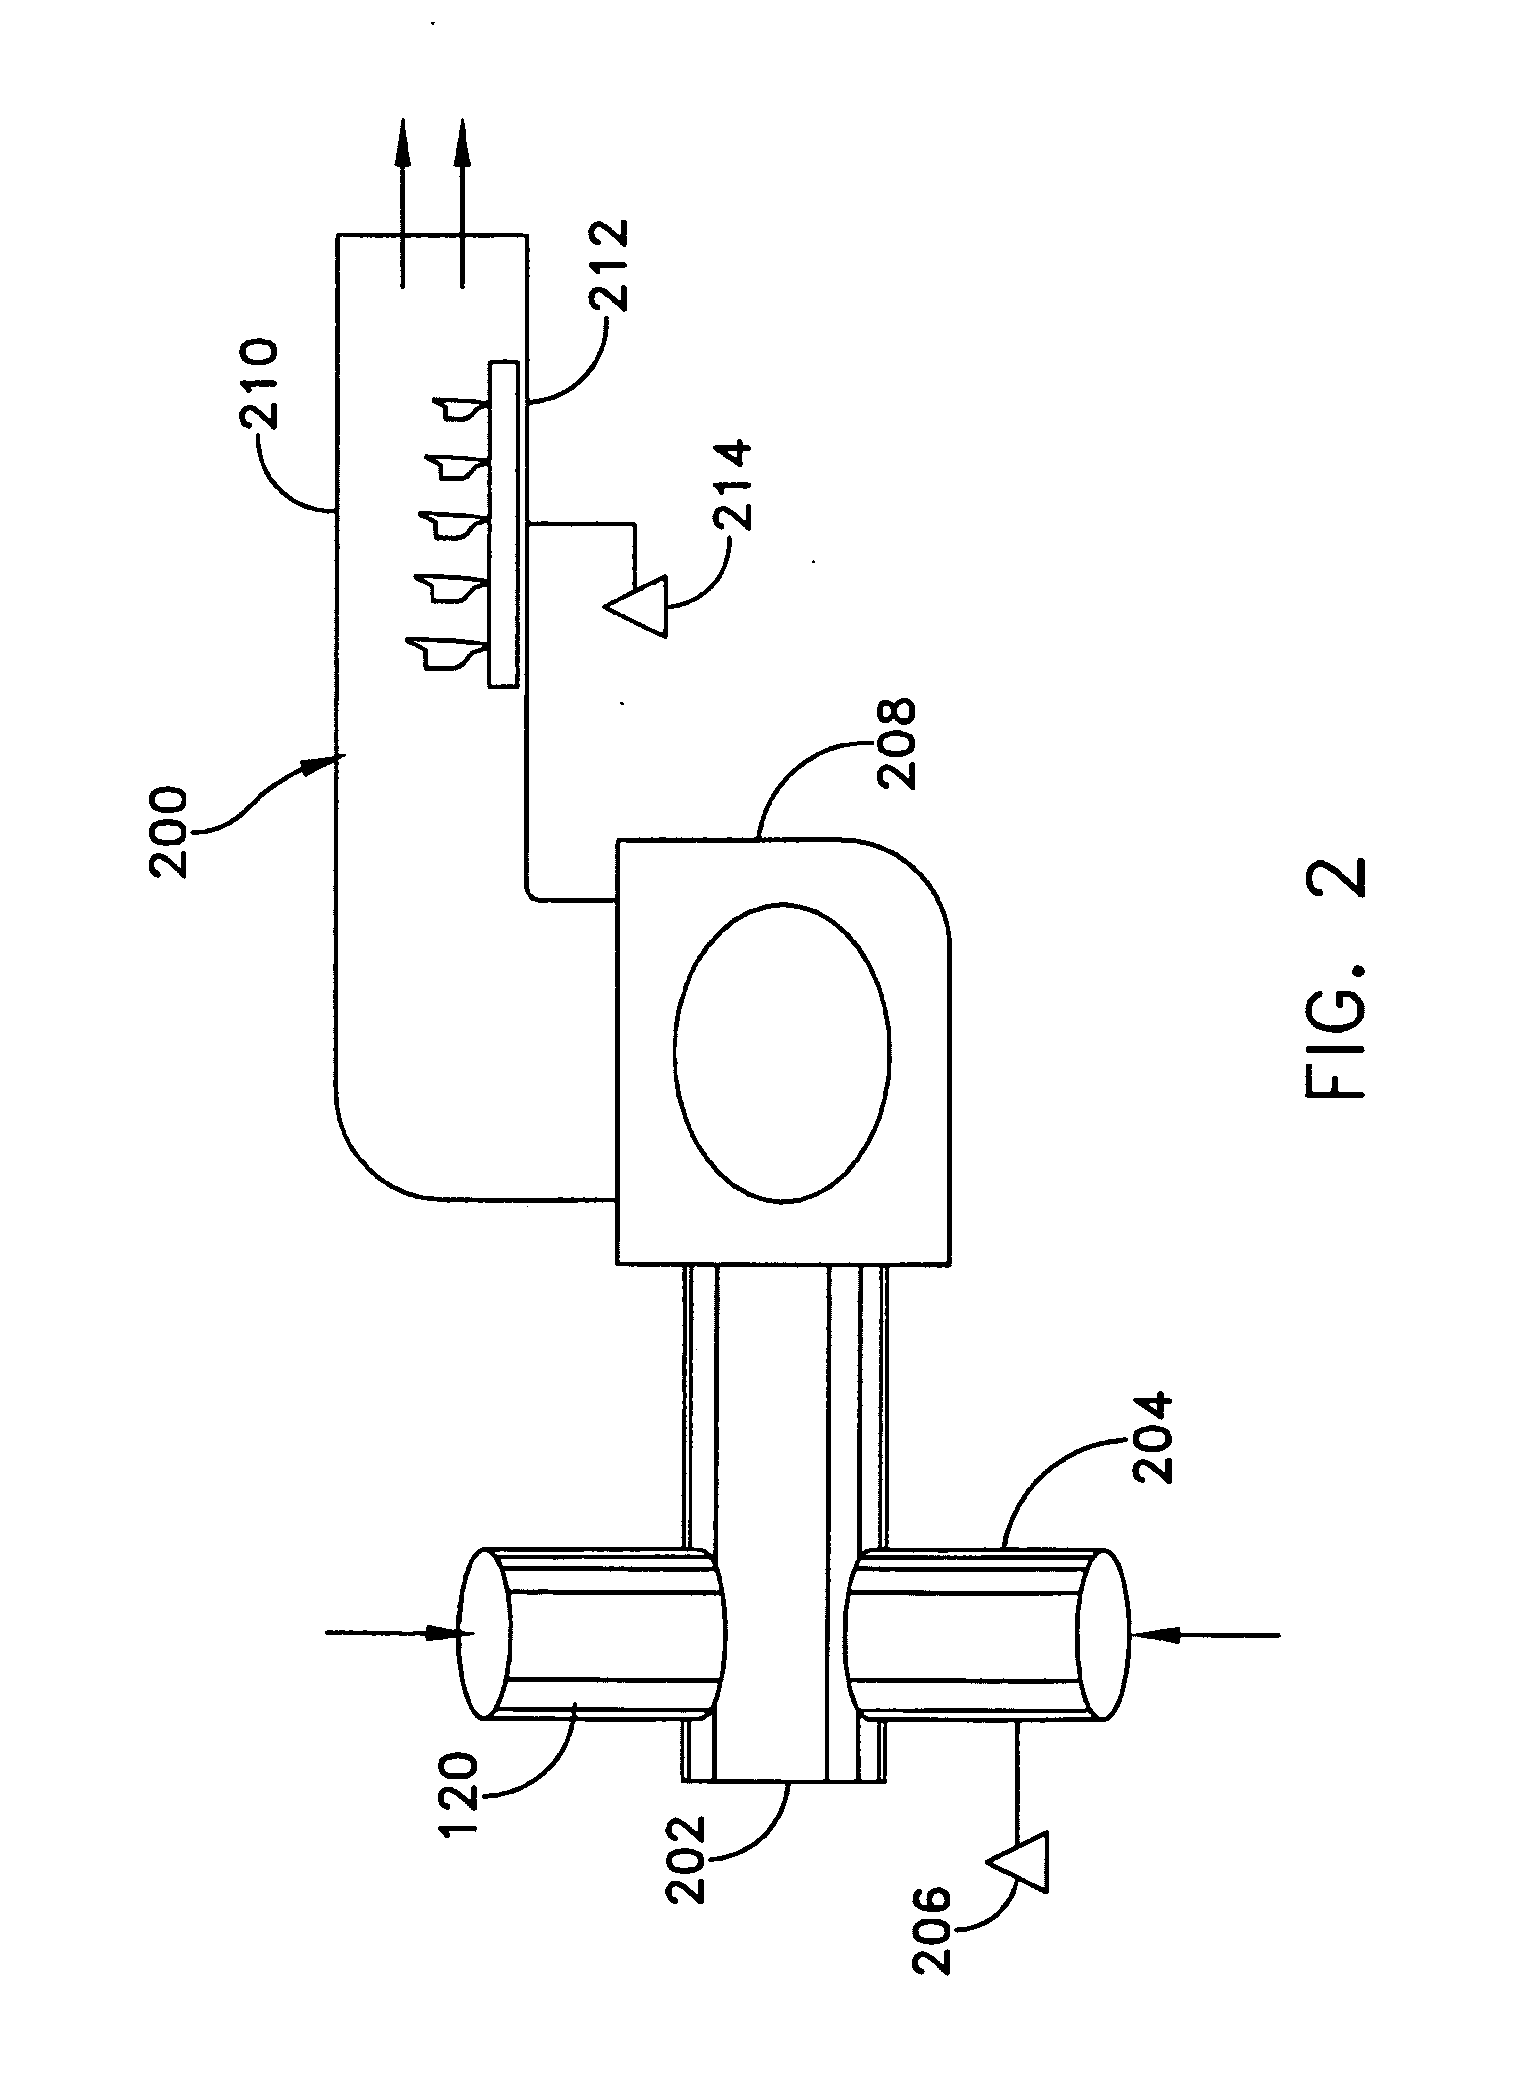 Method for curing a binder on insulation fibers